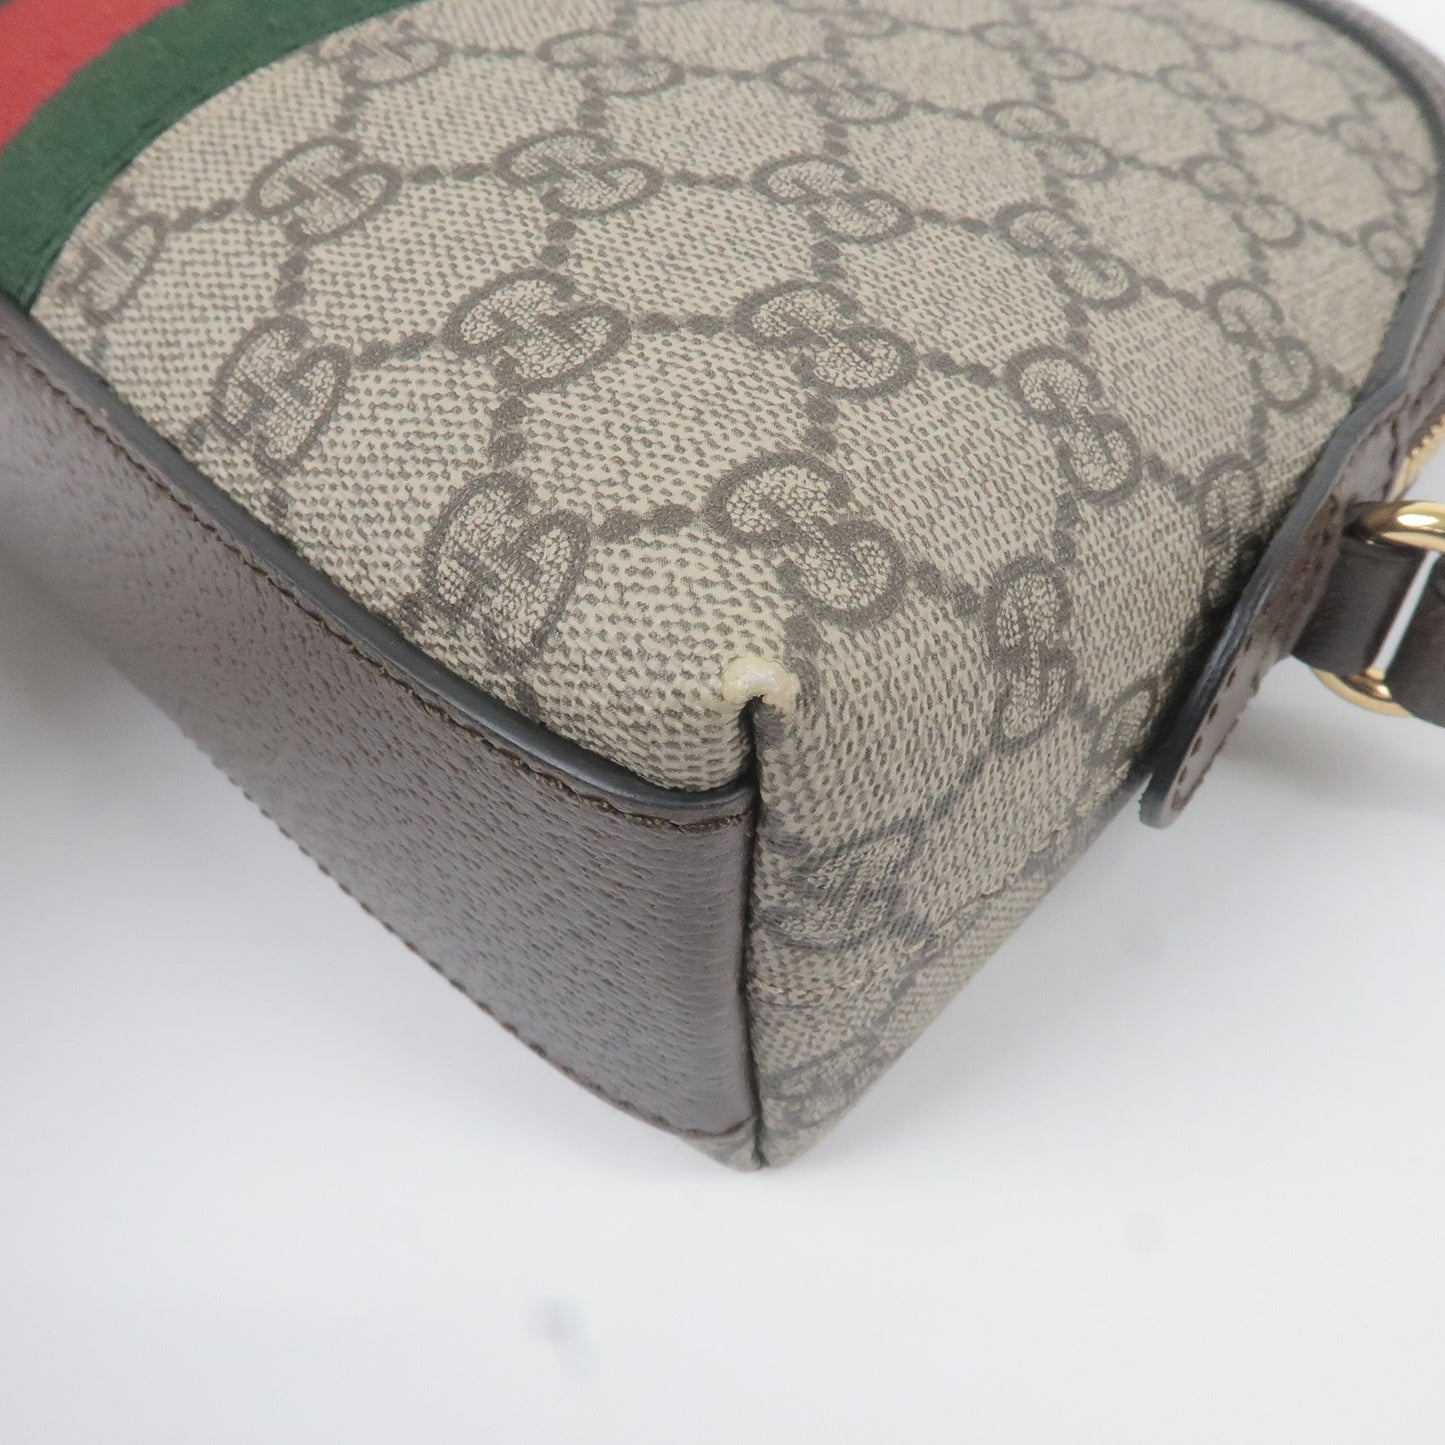 GUCCI Sherry Ophidia GG Supreme Leather Shoulder Bag 499621